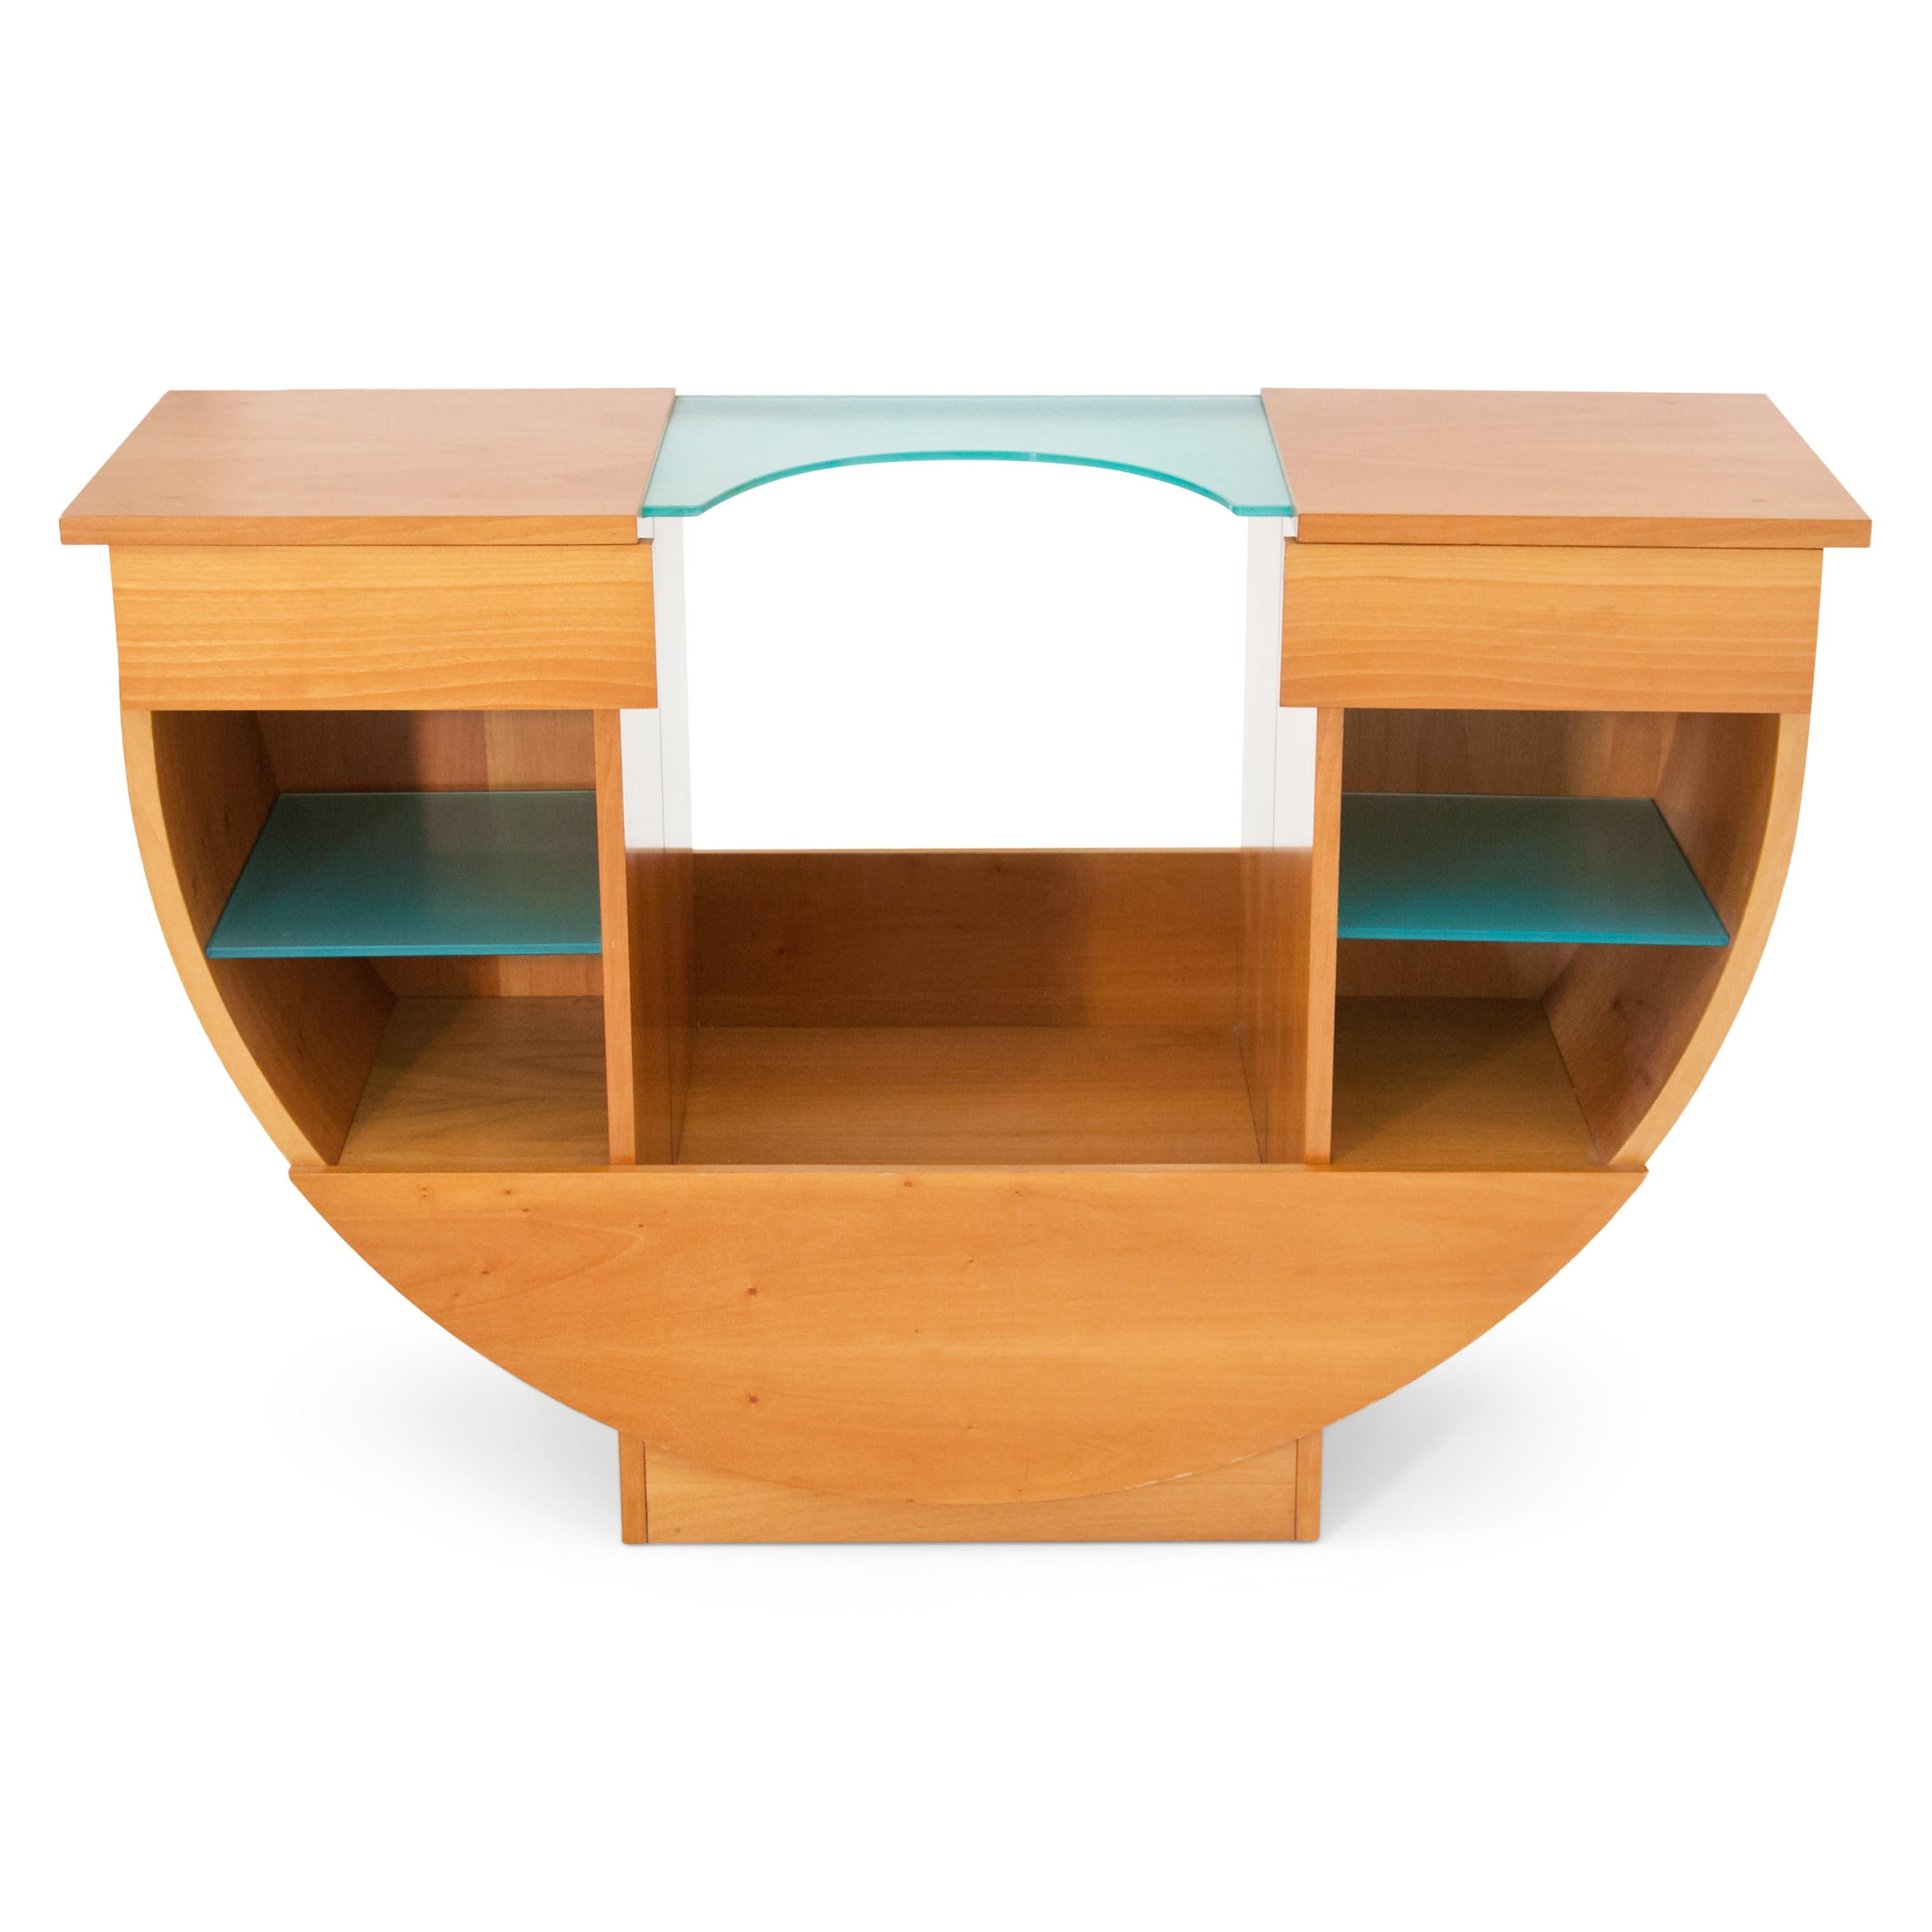 Modern Italian console in cherrywood and glass with two drawers.